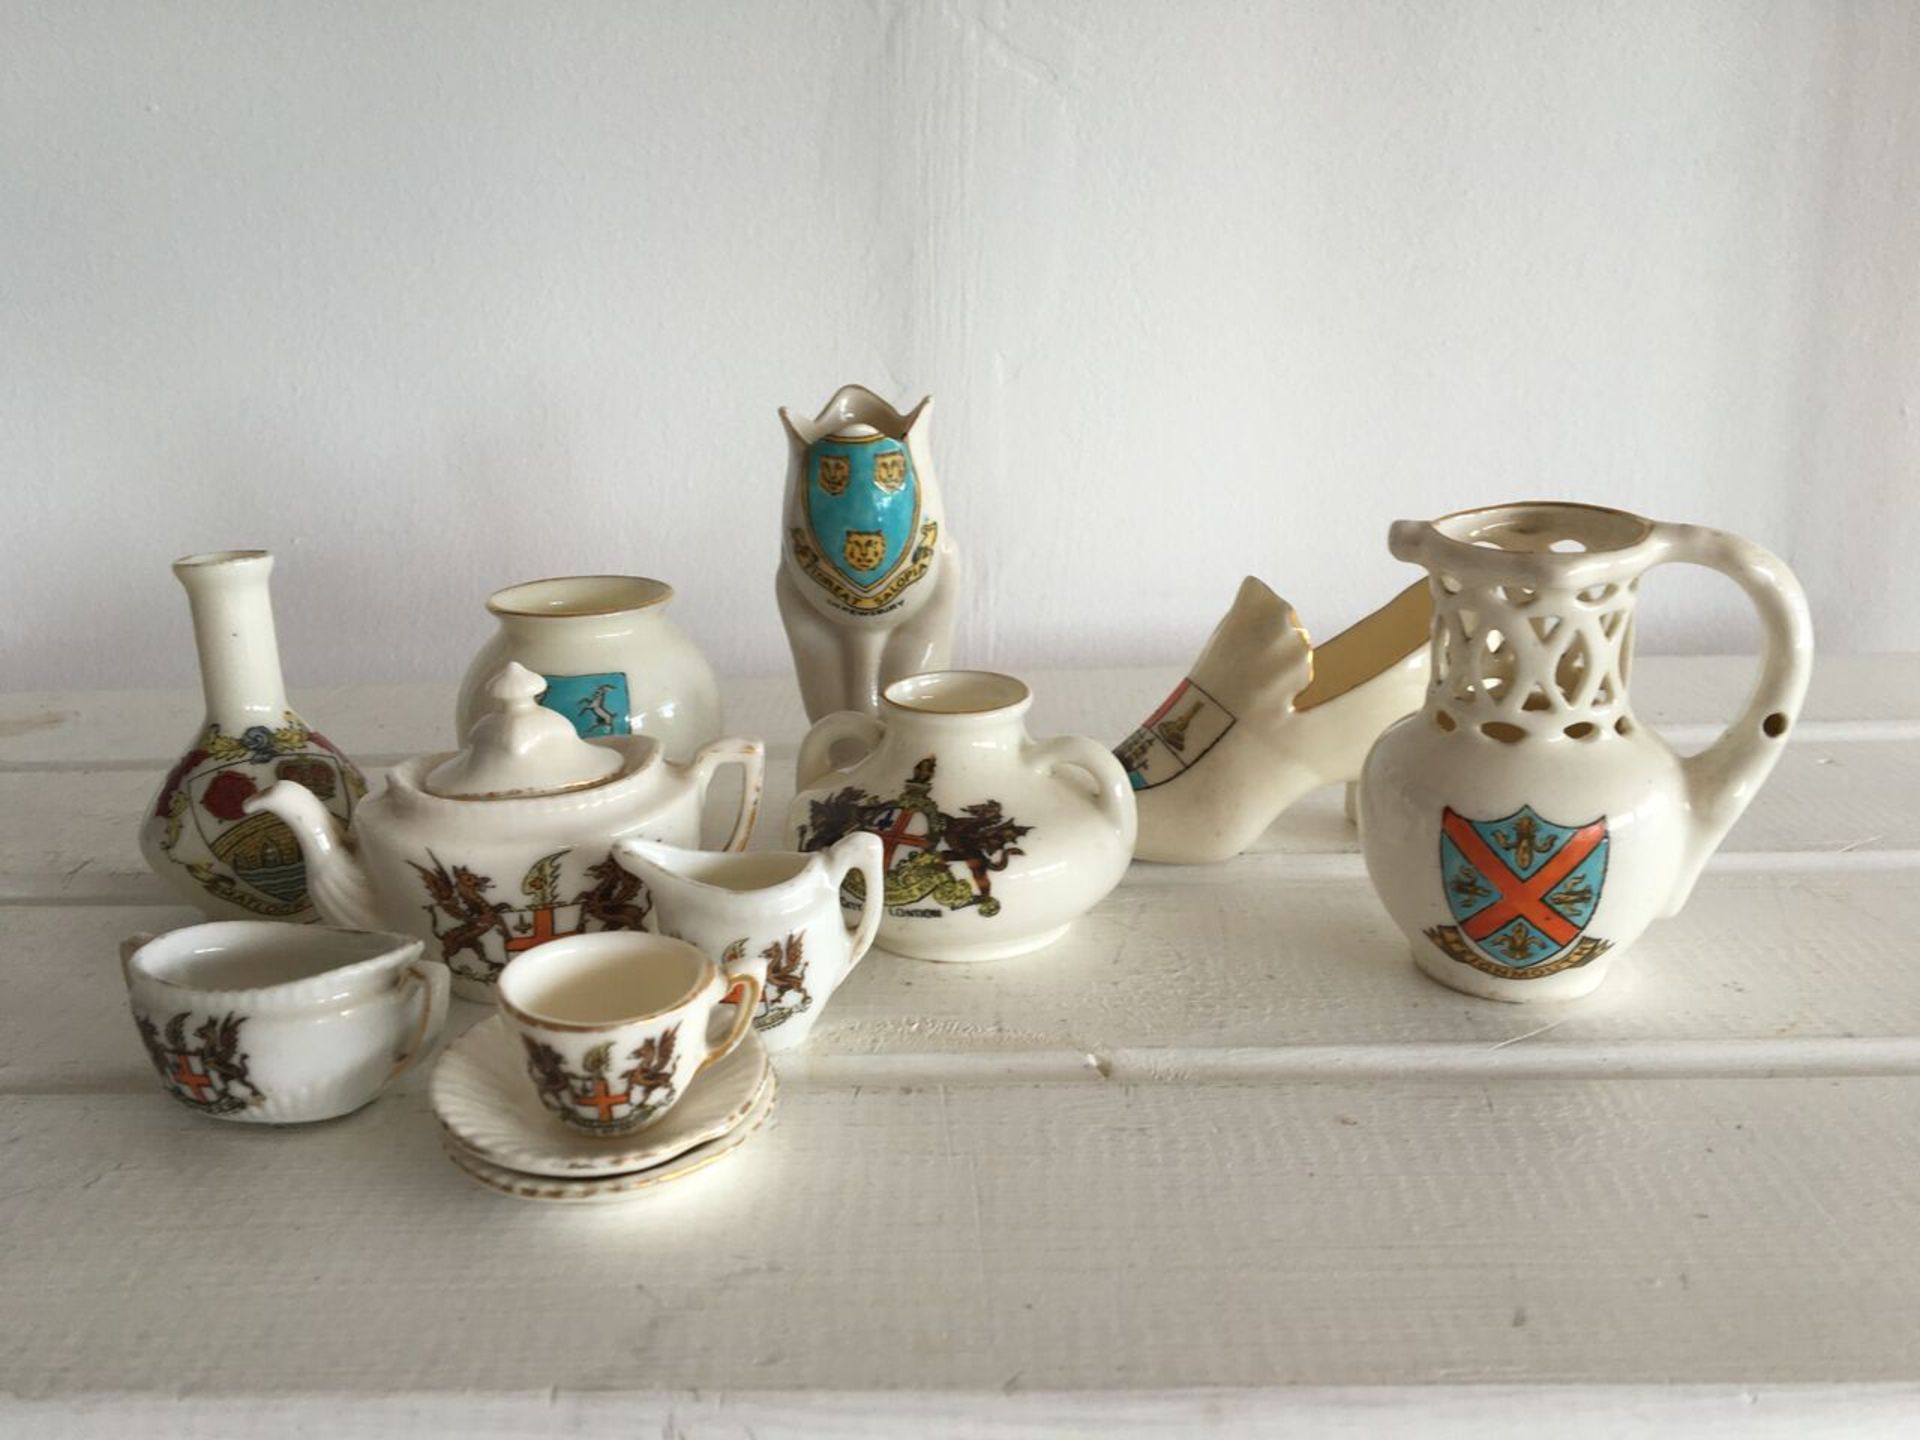 GROUP OF 12 CRESTED CHINA TO INCLUDE CITY OF LONDON ITEMS AND A PUZZLE JUG. FREE UK DELIVERY. NO